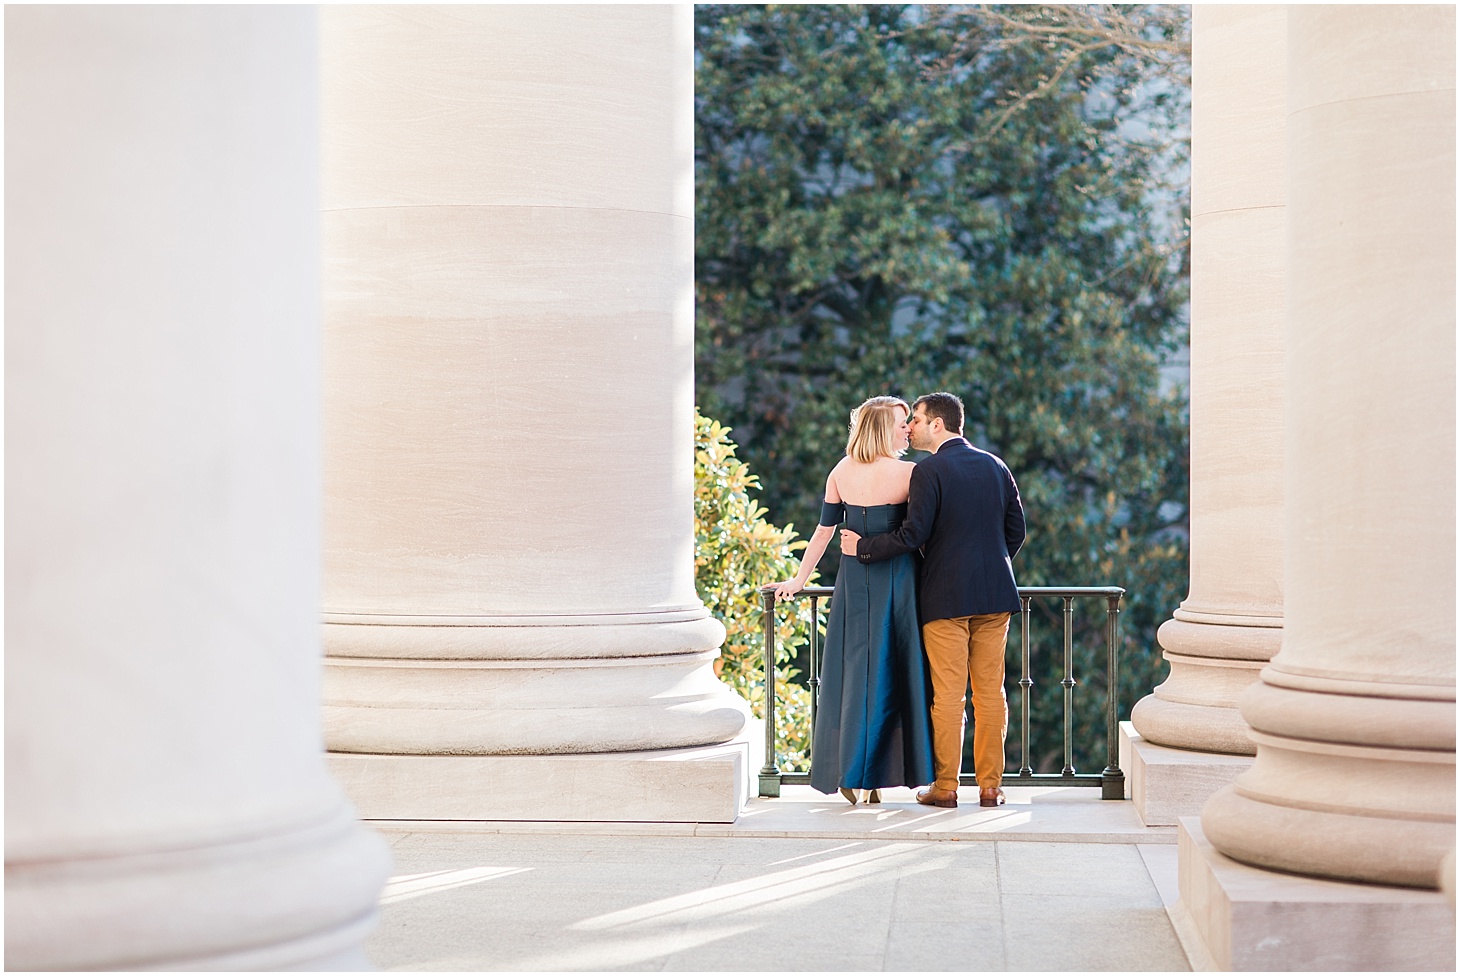 Sunrise Engagement Portraits in Washington, DC | Formal Winter Engagement Session at National Gallery of Art | Sarah Bradshaw Photography